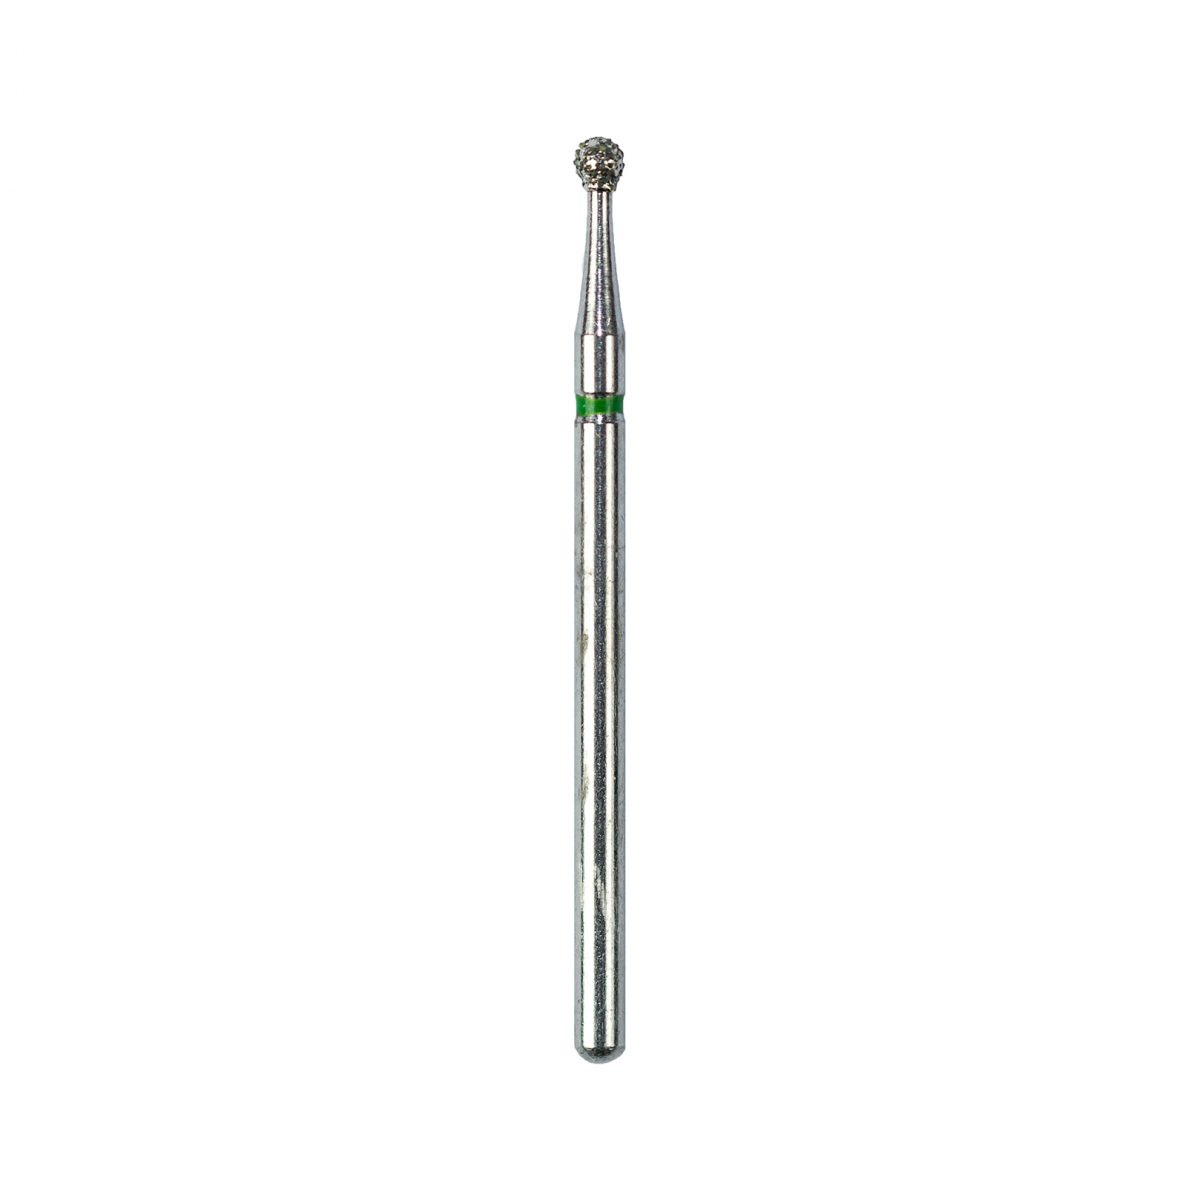 Dental surgical instruments – Extra Long – Surgical Bur 014mm